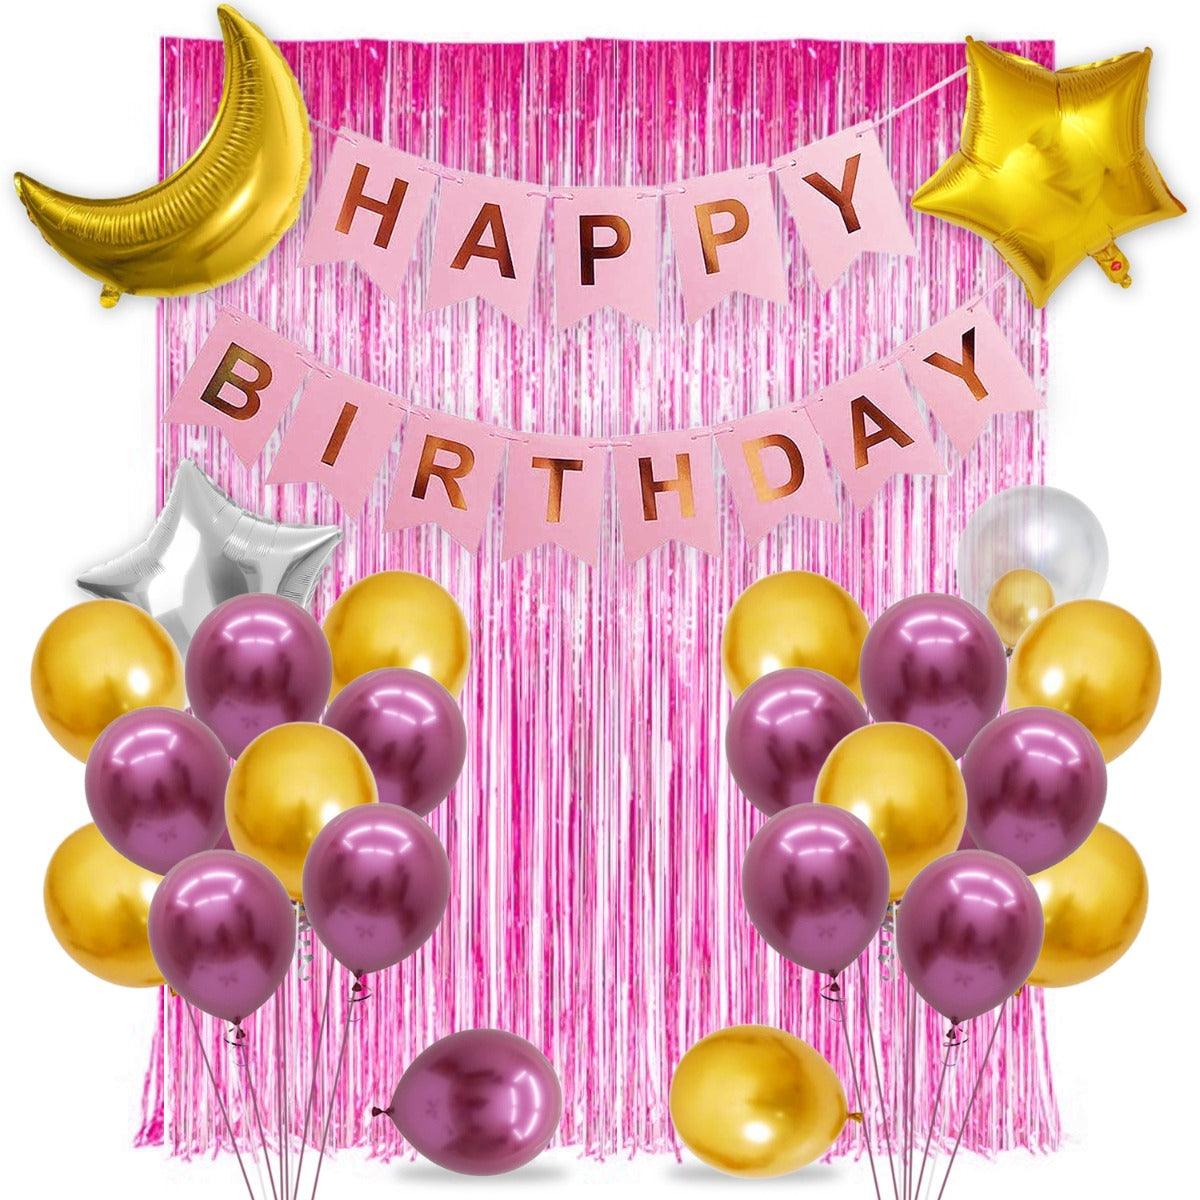 PartyCorp Happy Birthday Decoration Kit Combo 34 Pcs - Pink, Pink & Gold Chrome Balloons(24 pcs), 1 pc Pink & Gold Happy Birthday Printed Banner, 2 pc Pink Big Foil Curtain, 1 pc Moon & Star Foil Balloon Bouquet